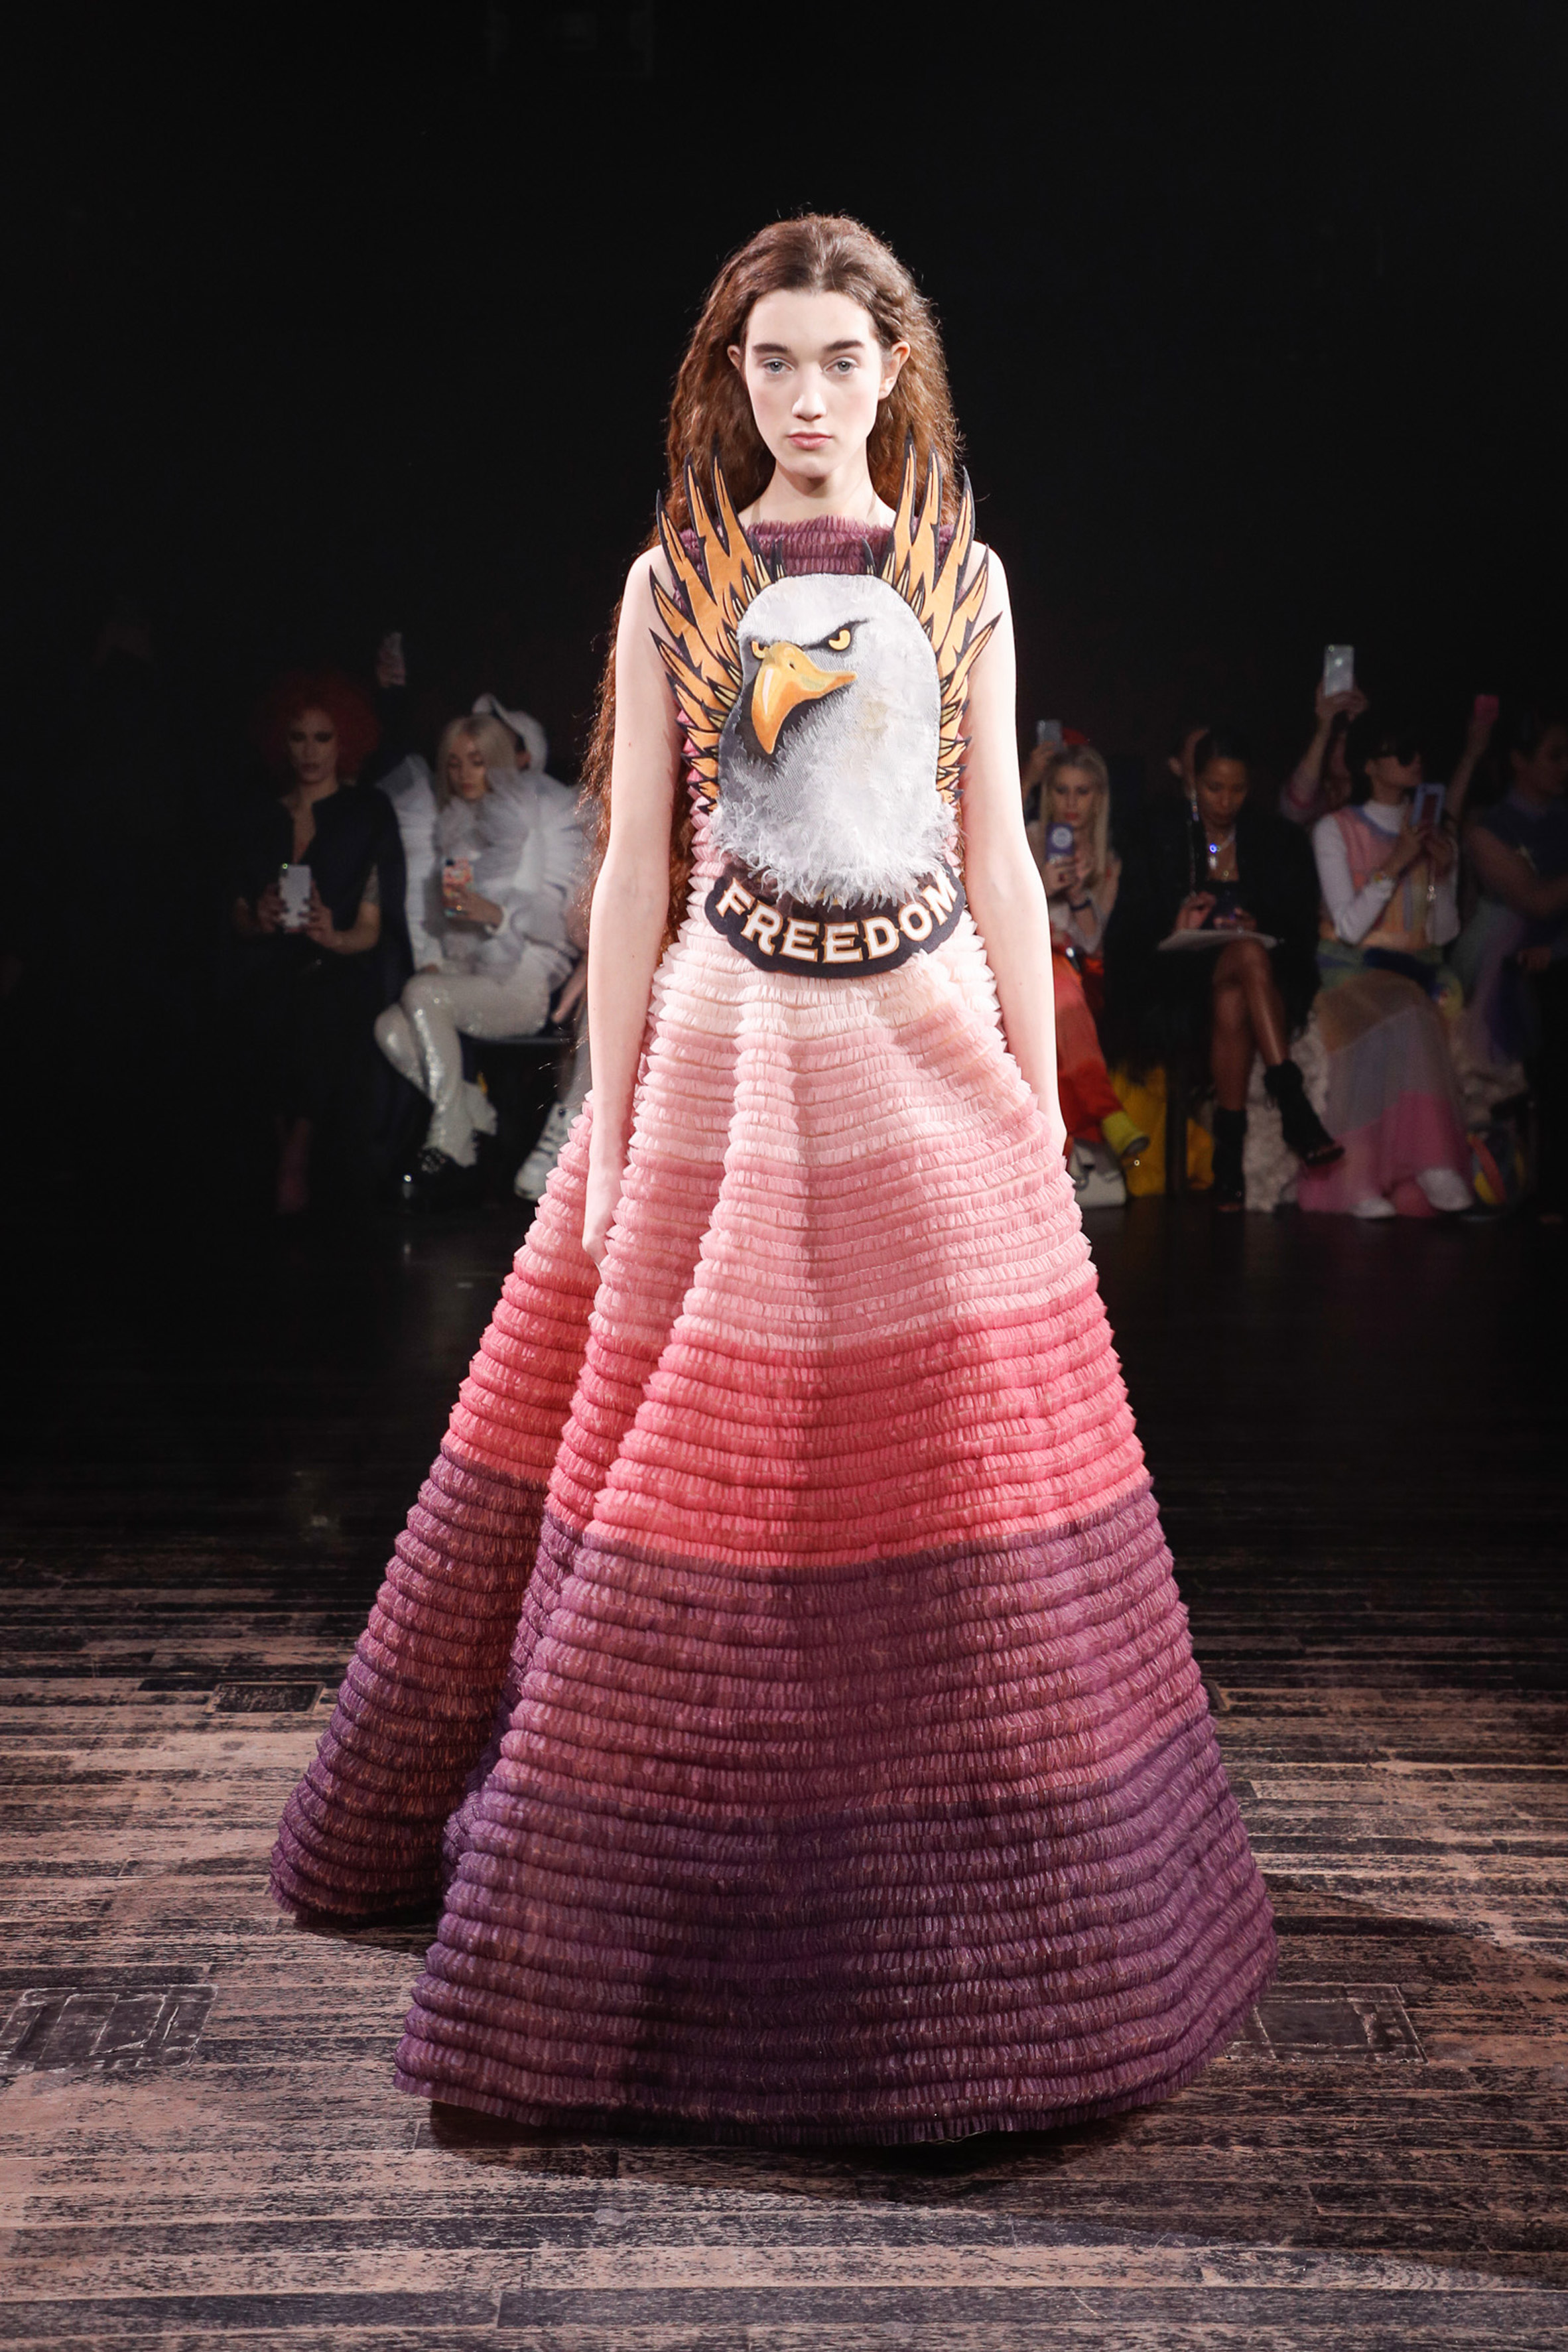 Viktor & Rolf's Spring Summer 2019 couture Fashion Statements collection  demonstrates the expressive power of clothing